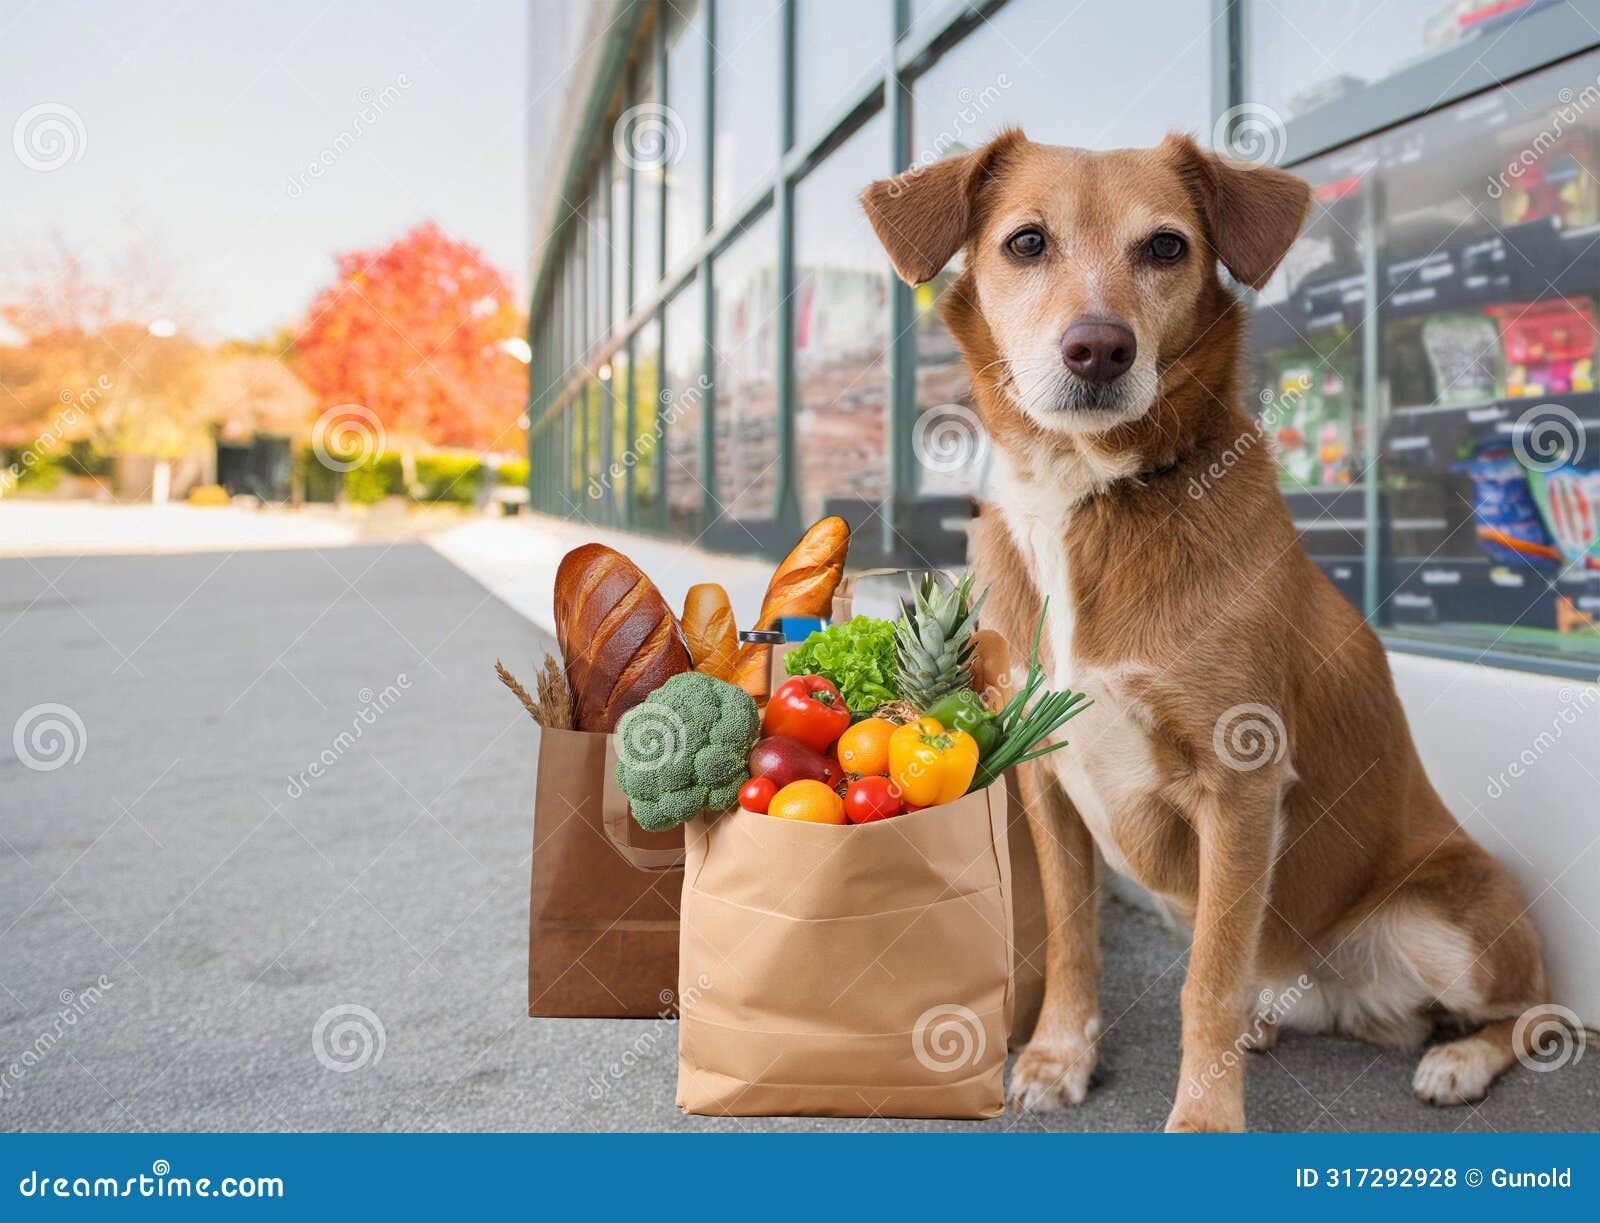 dog guards paper bags full with bread vegetables and fruit